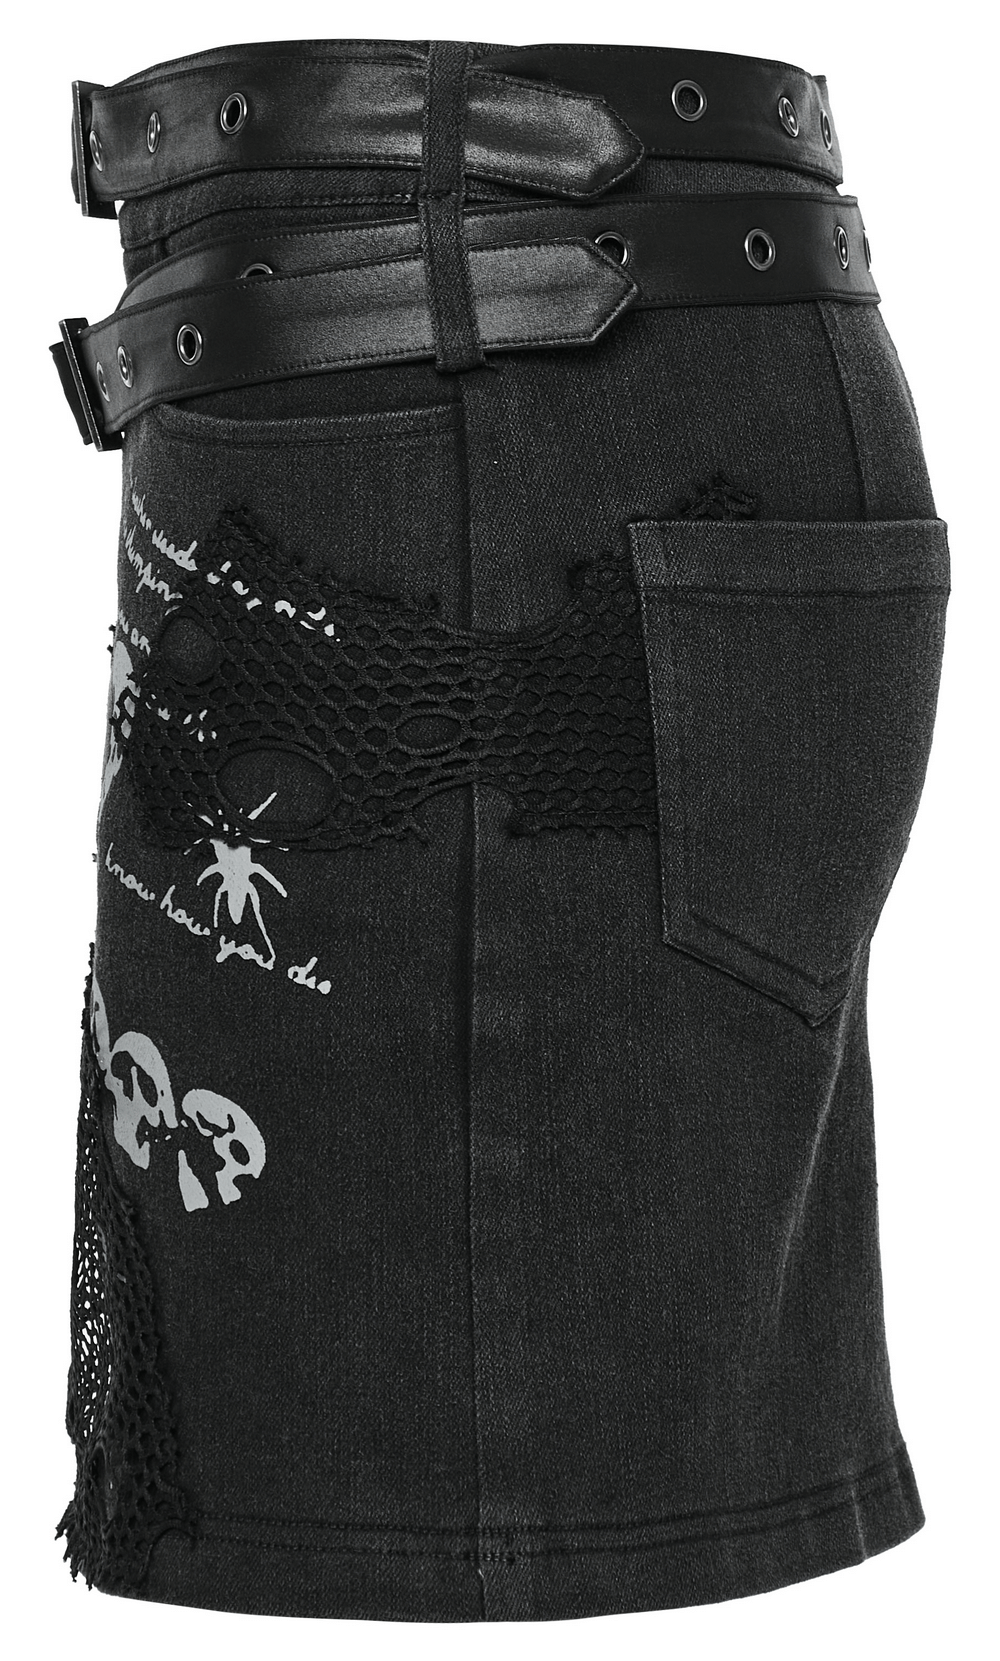 Gothic Twill and Mesh Female Skirt with Skull Print - HARD'N'HEAVY